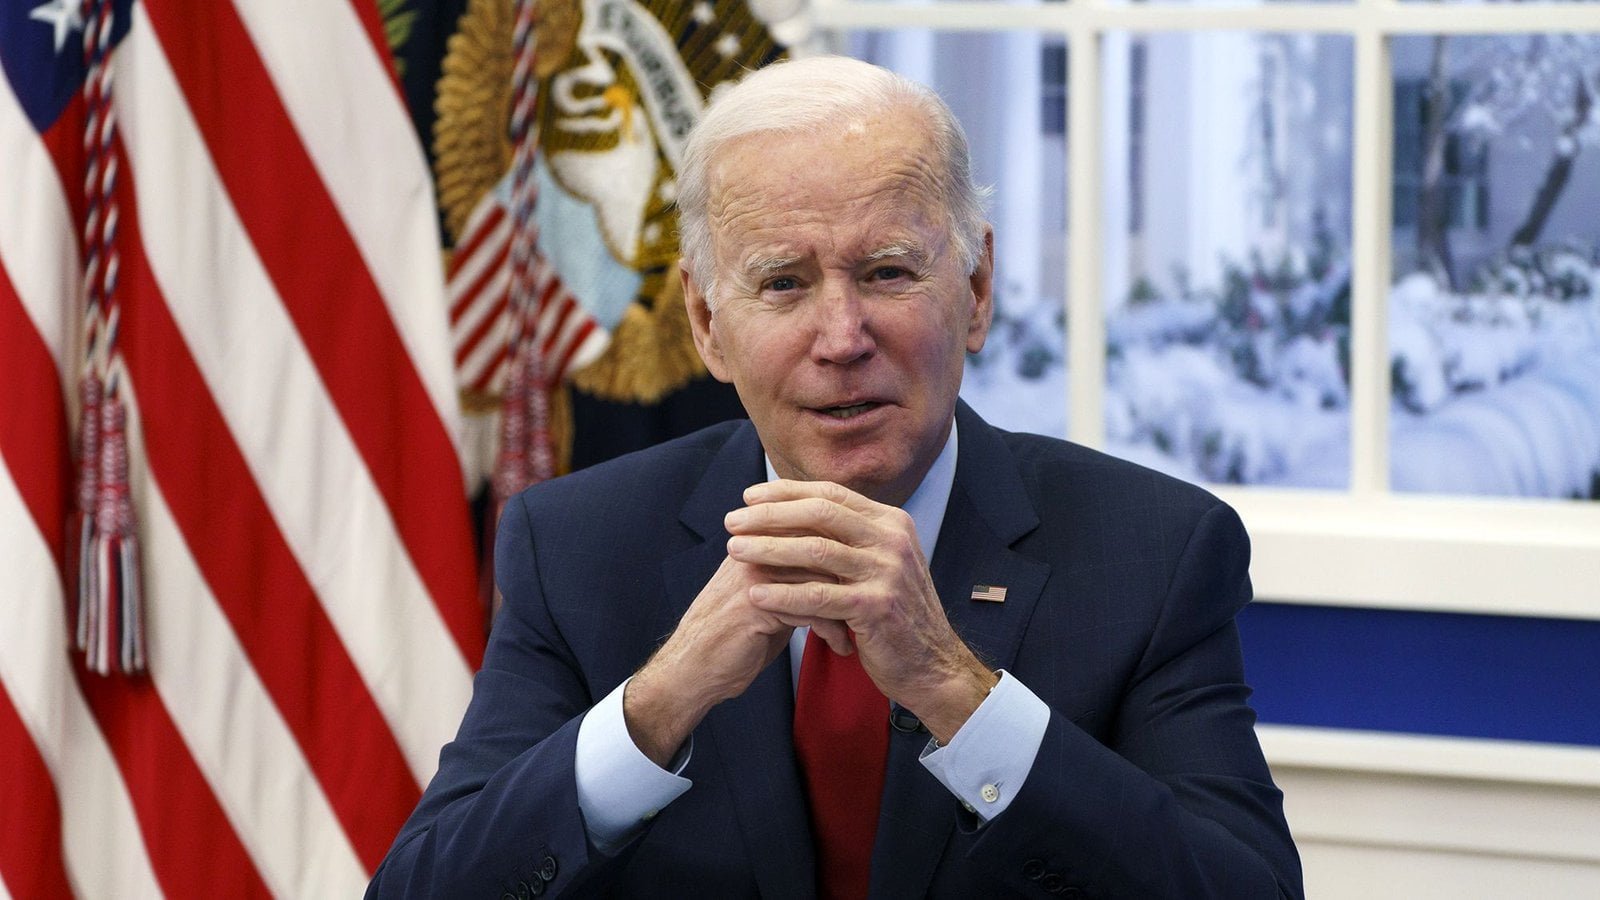 biden-administration-tightens-student-loan-forgiveness-amid-legal-challenges